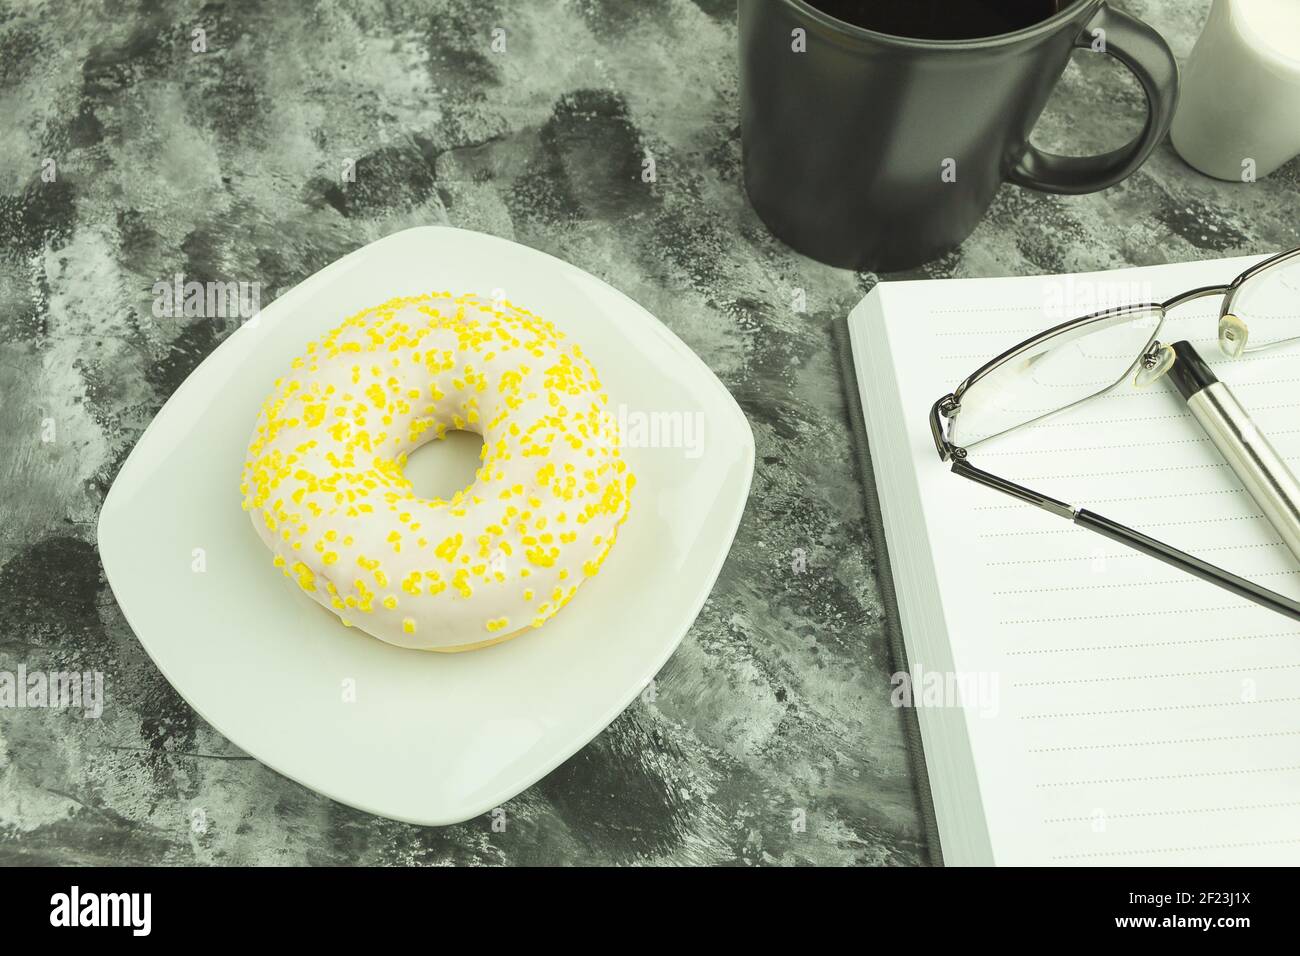 Round donut in chocolate on a white plate. Donut covered with white chocolate and sprinkled with lemon zest. Donut and coffee on the table. Space for Stock Photo